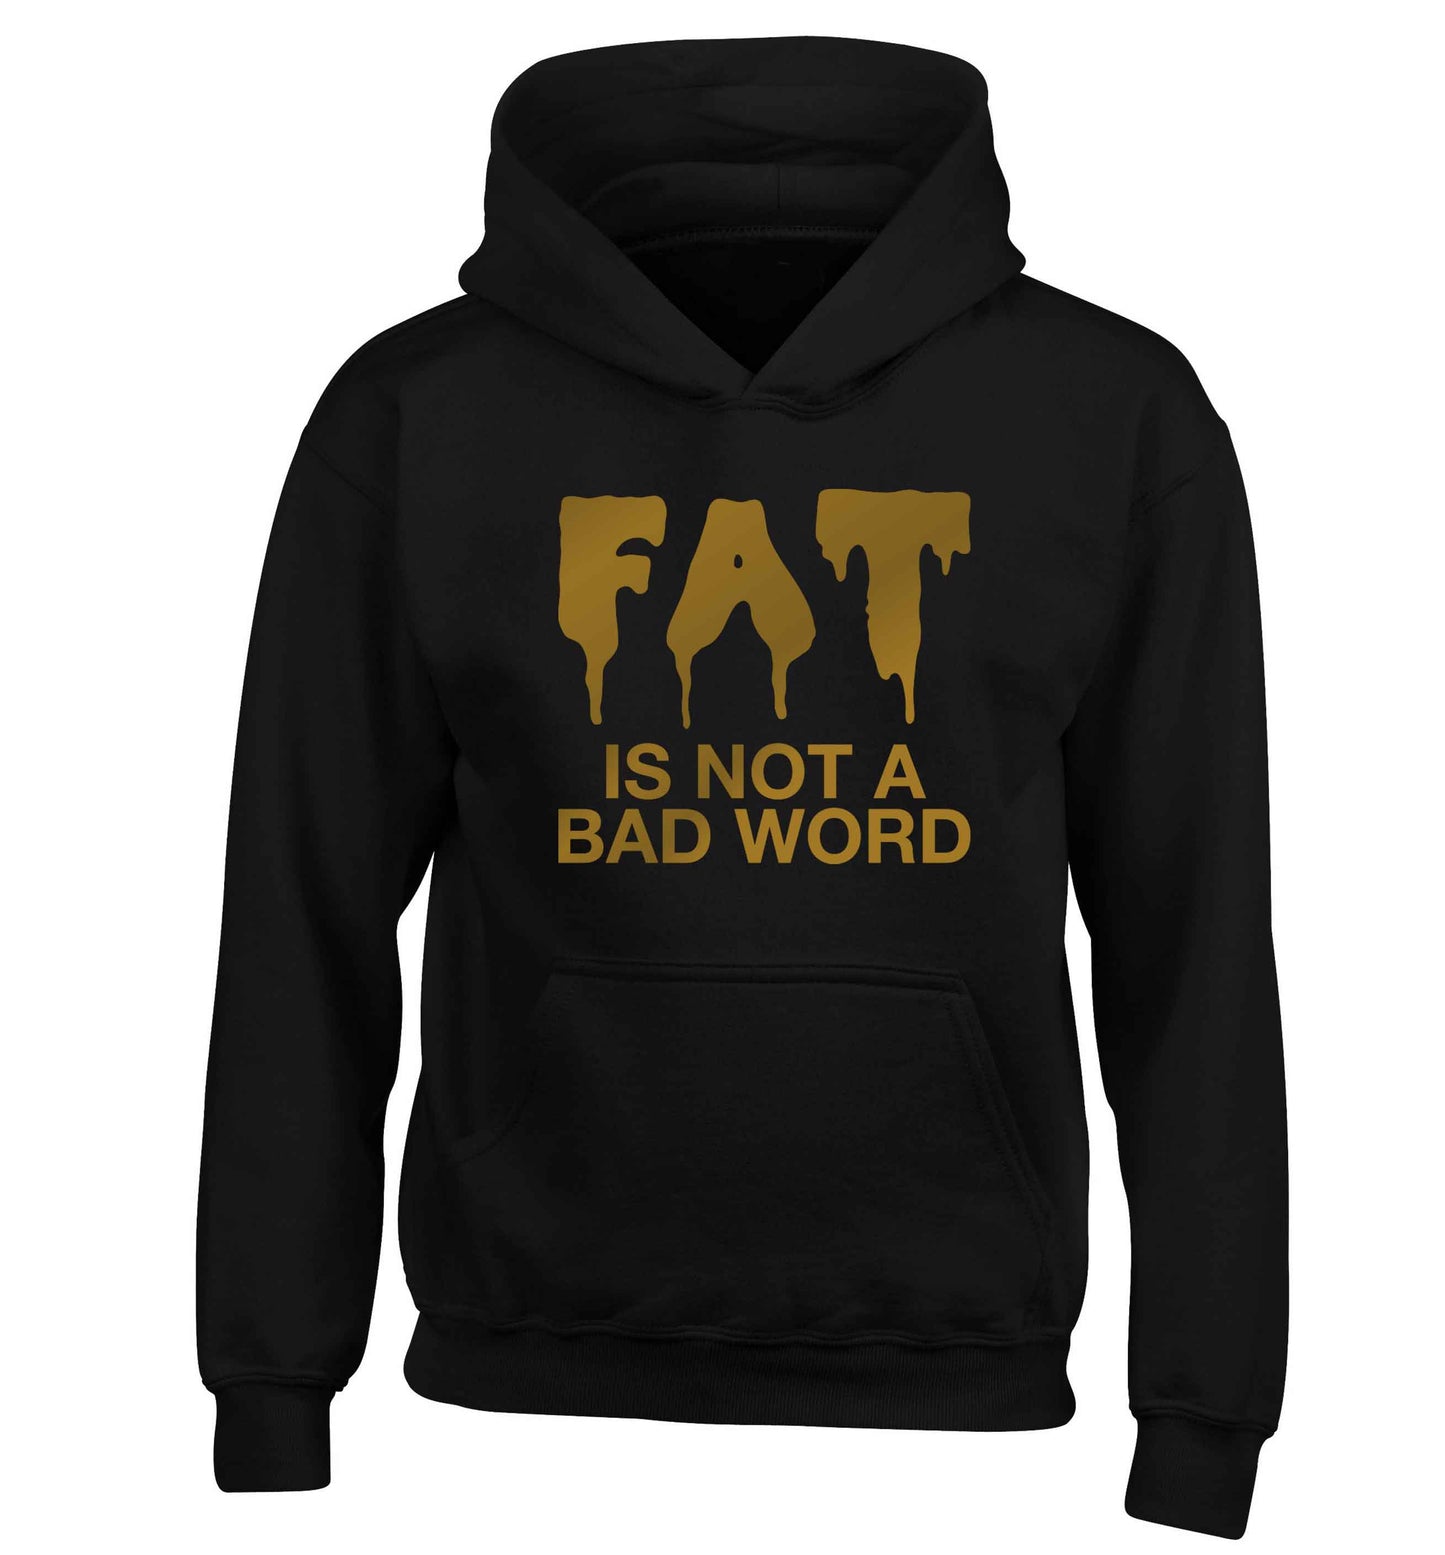 Fat is not a bad word children's black hoodie 12-13 Years